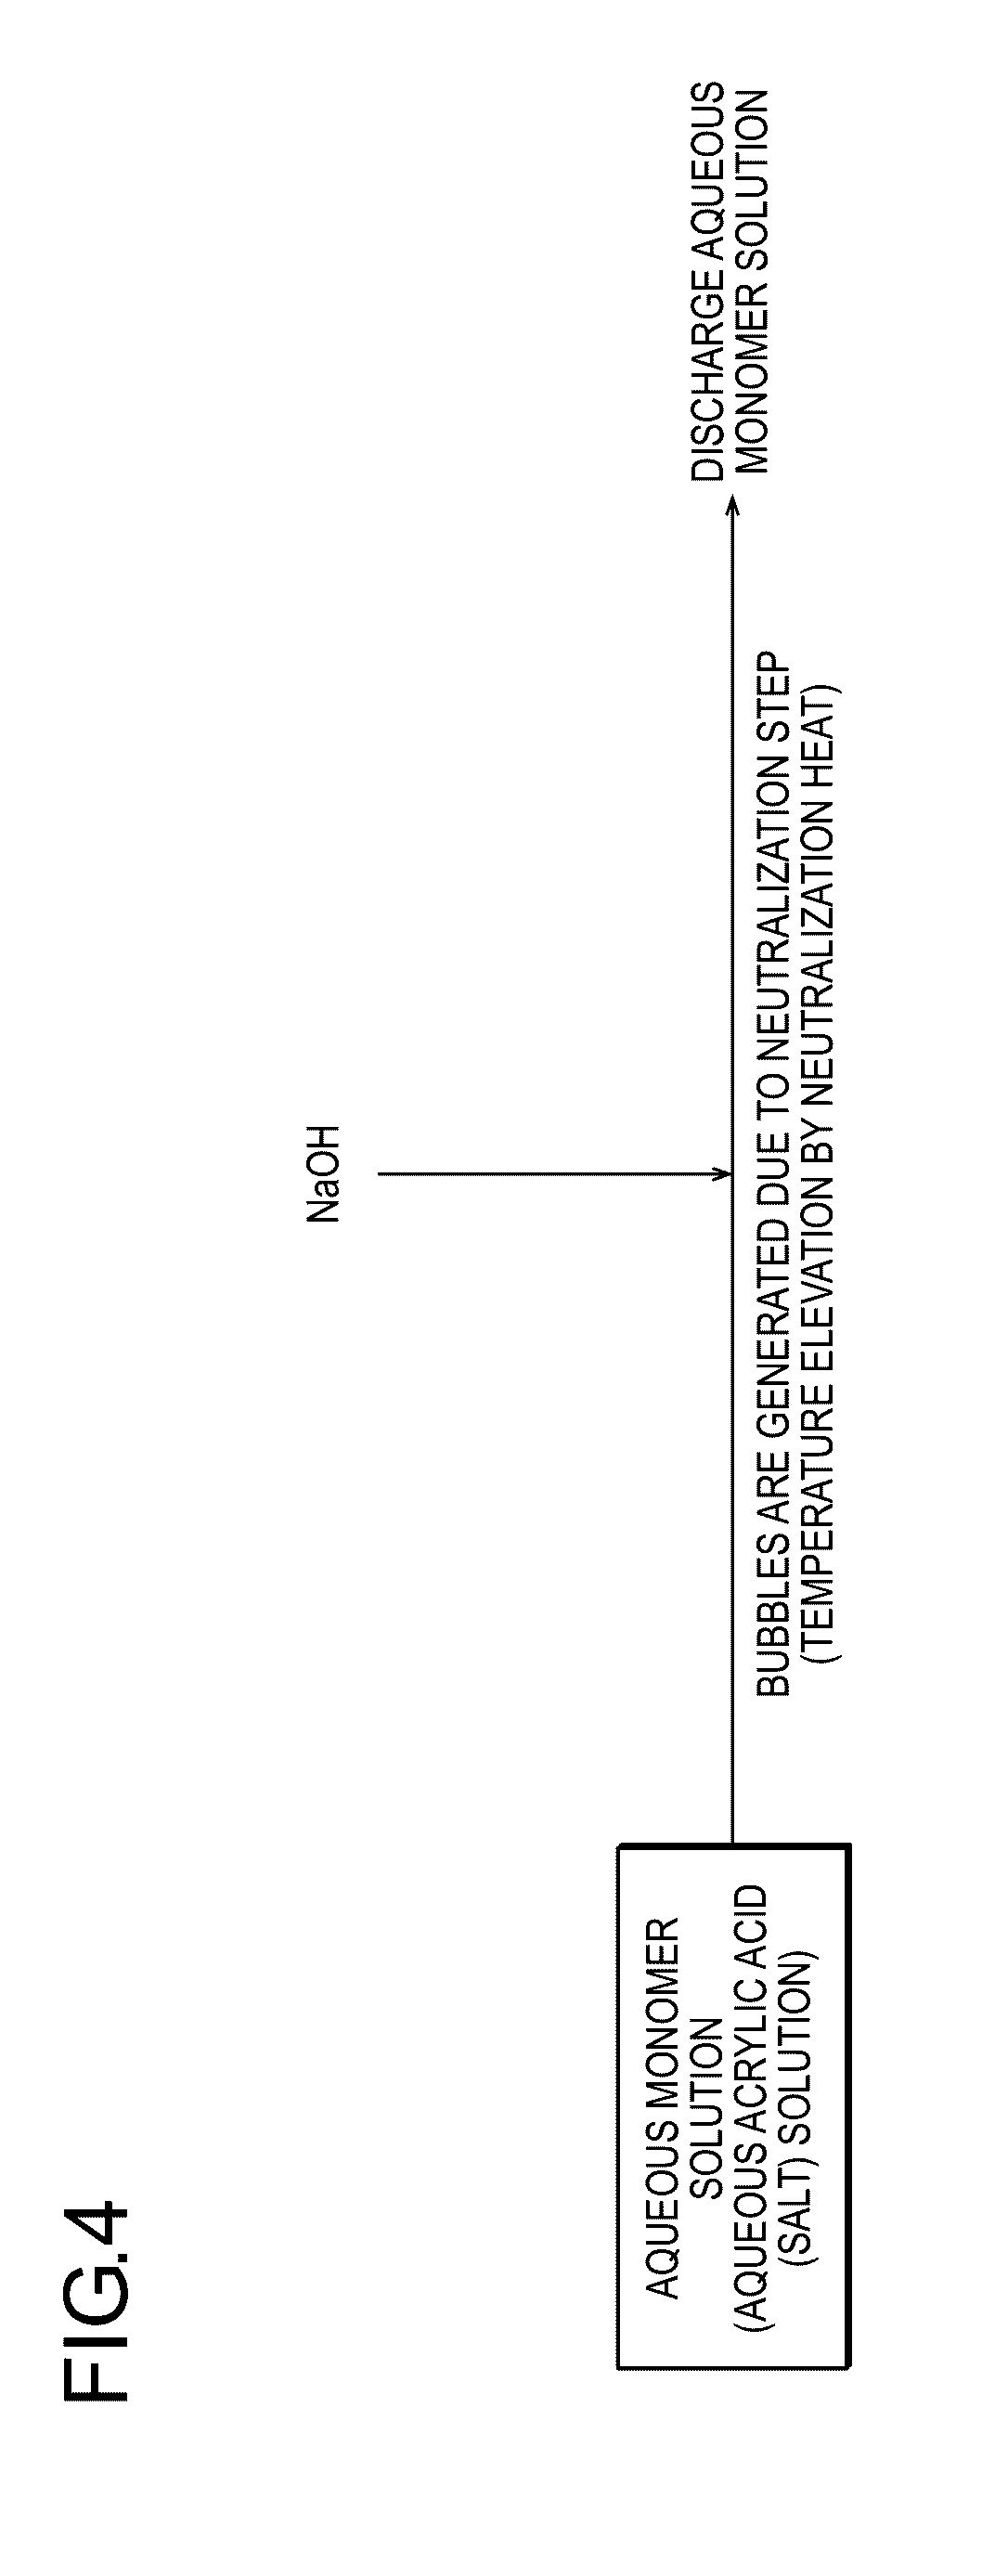 Poly(Meth)Acrylic Acid (Salt)-Based Particulate Absorbent, and Production Method